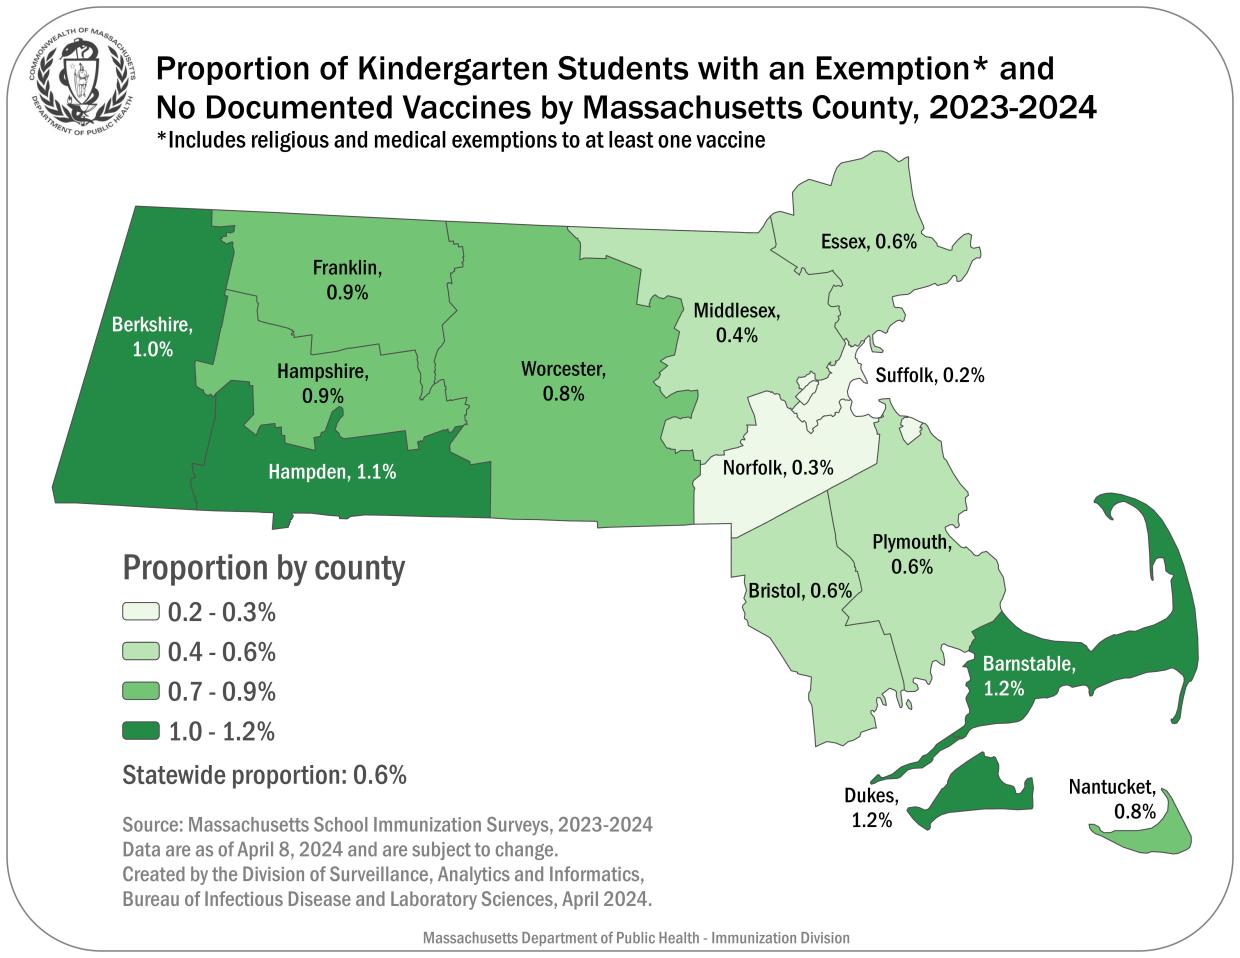 This map shows the proportion of Kindergarten Students by Mass County with an Exemption and No Vaccines, 2023-2024. These are religious and medical exemptions combined and current as of 4/8/24, and subject to change. The source of these data is via the Mass School Immunization Surveys 2023-2024. State average 0.6% Barnstable 1.2% Berkshire 1.0% Bristol 0.6% Dukes 1.2% Hampden 1.1% Hampshire 0.9% Essex 0.6% Franklin 0.9% Middlesex 0.4% Nantucket 0.8% Norfolk 0.3% Plymouth 0.6% Suffolk 0.2% Worcester 0.8%